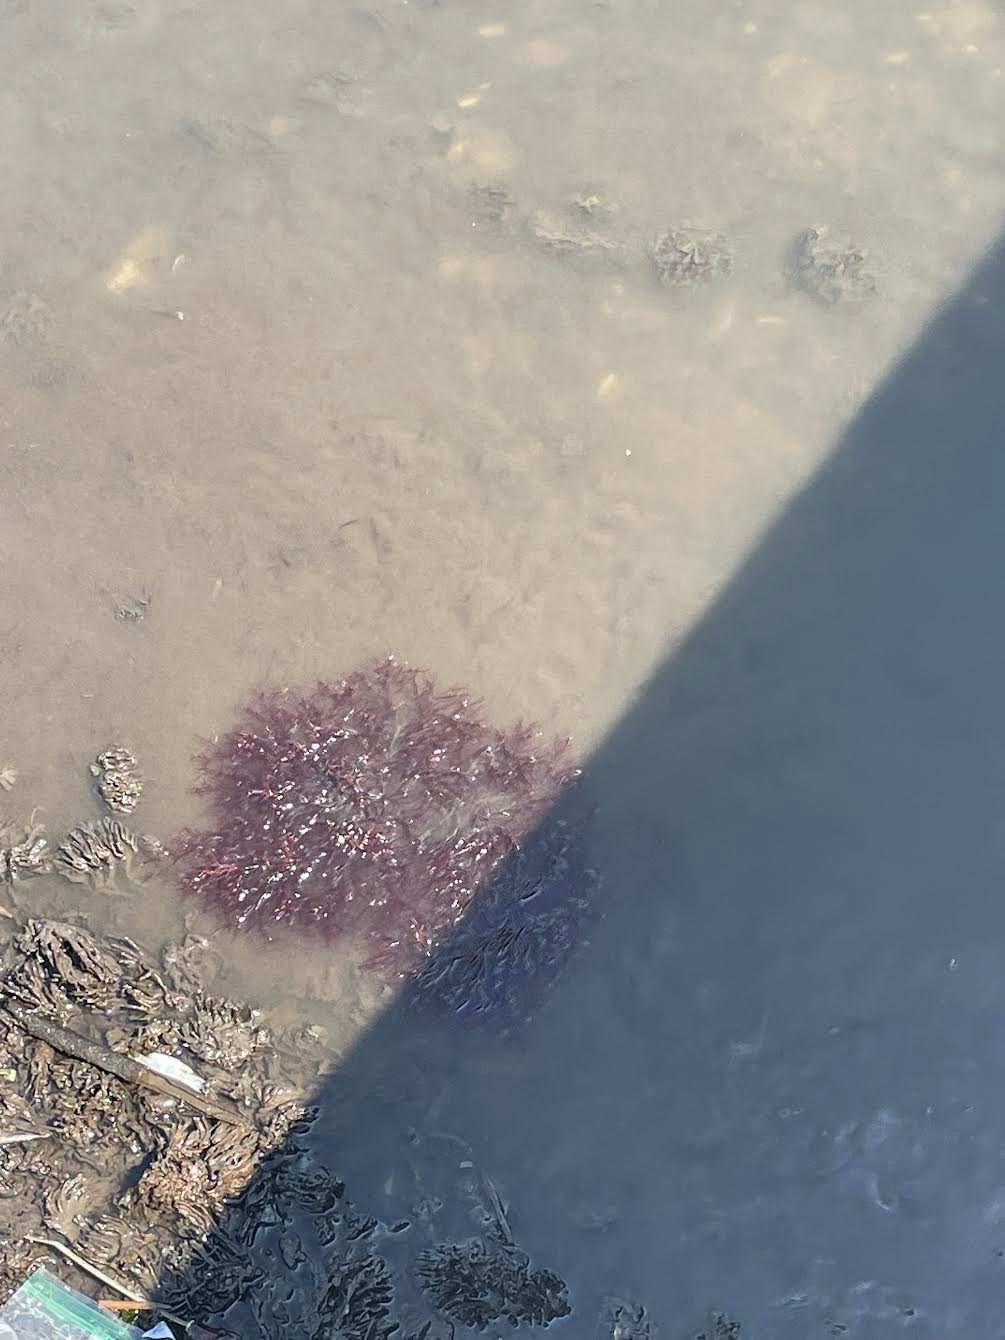 The red seaweed found at the Sandspit Marina dock in Patchogue Village.